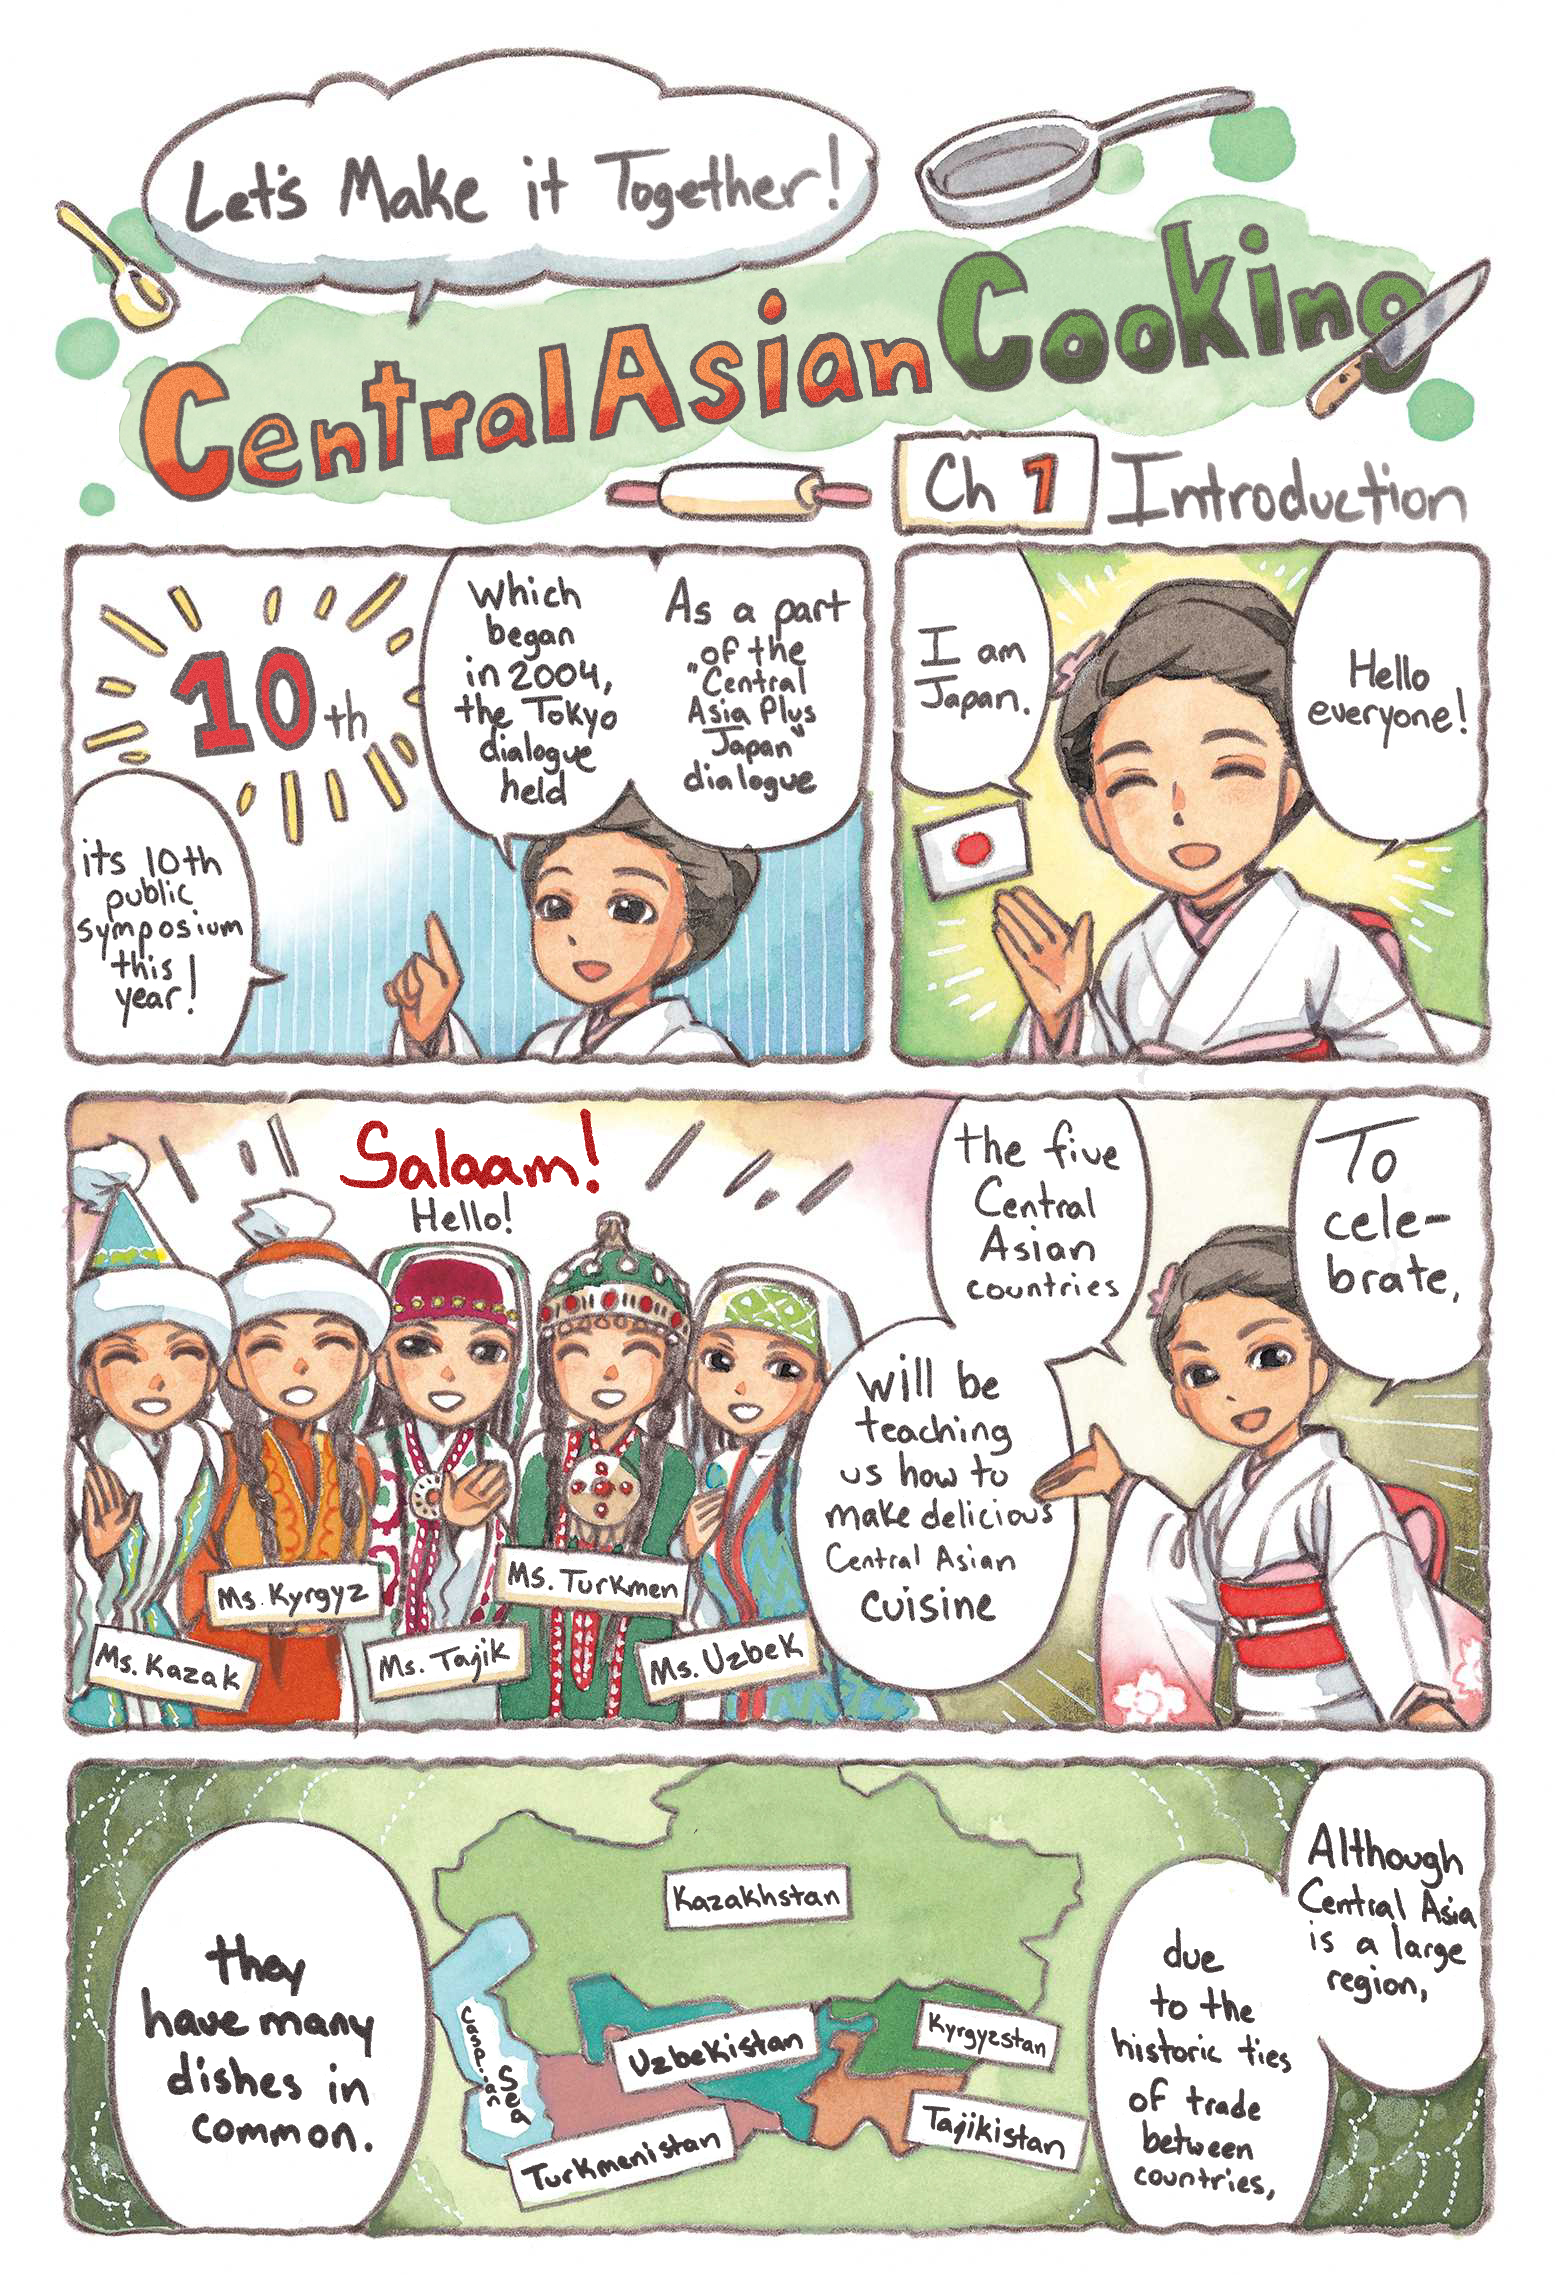 Central Asian Cooking Ch.1